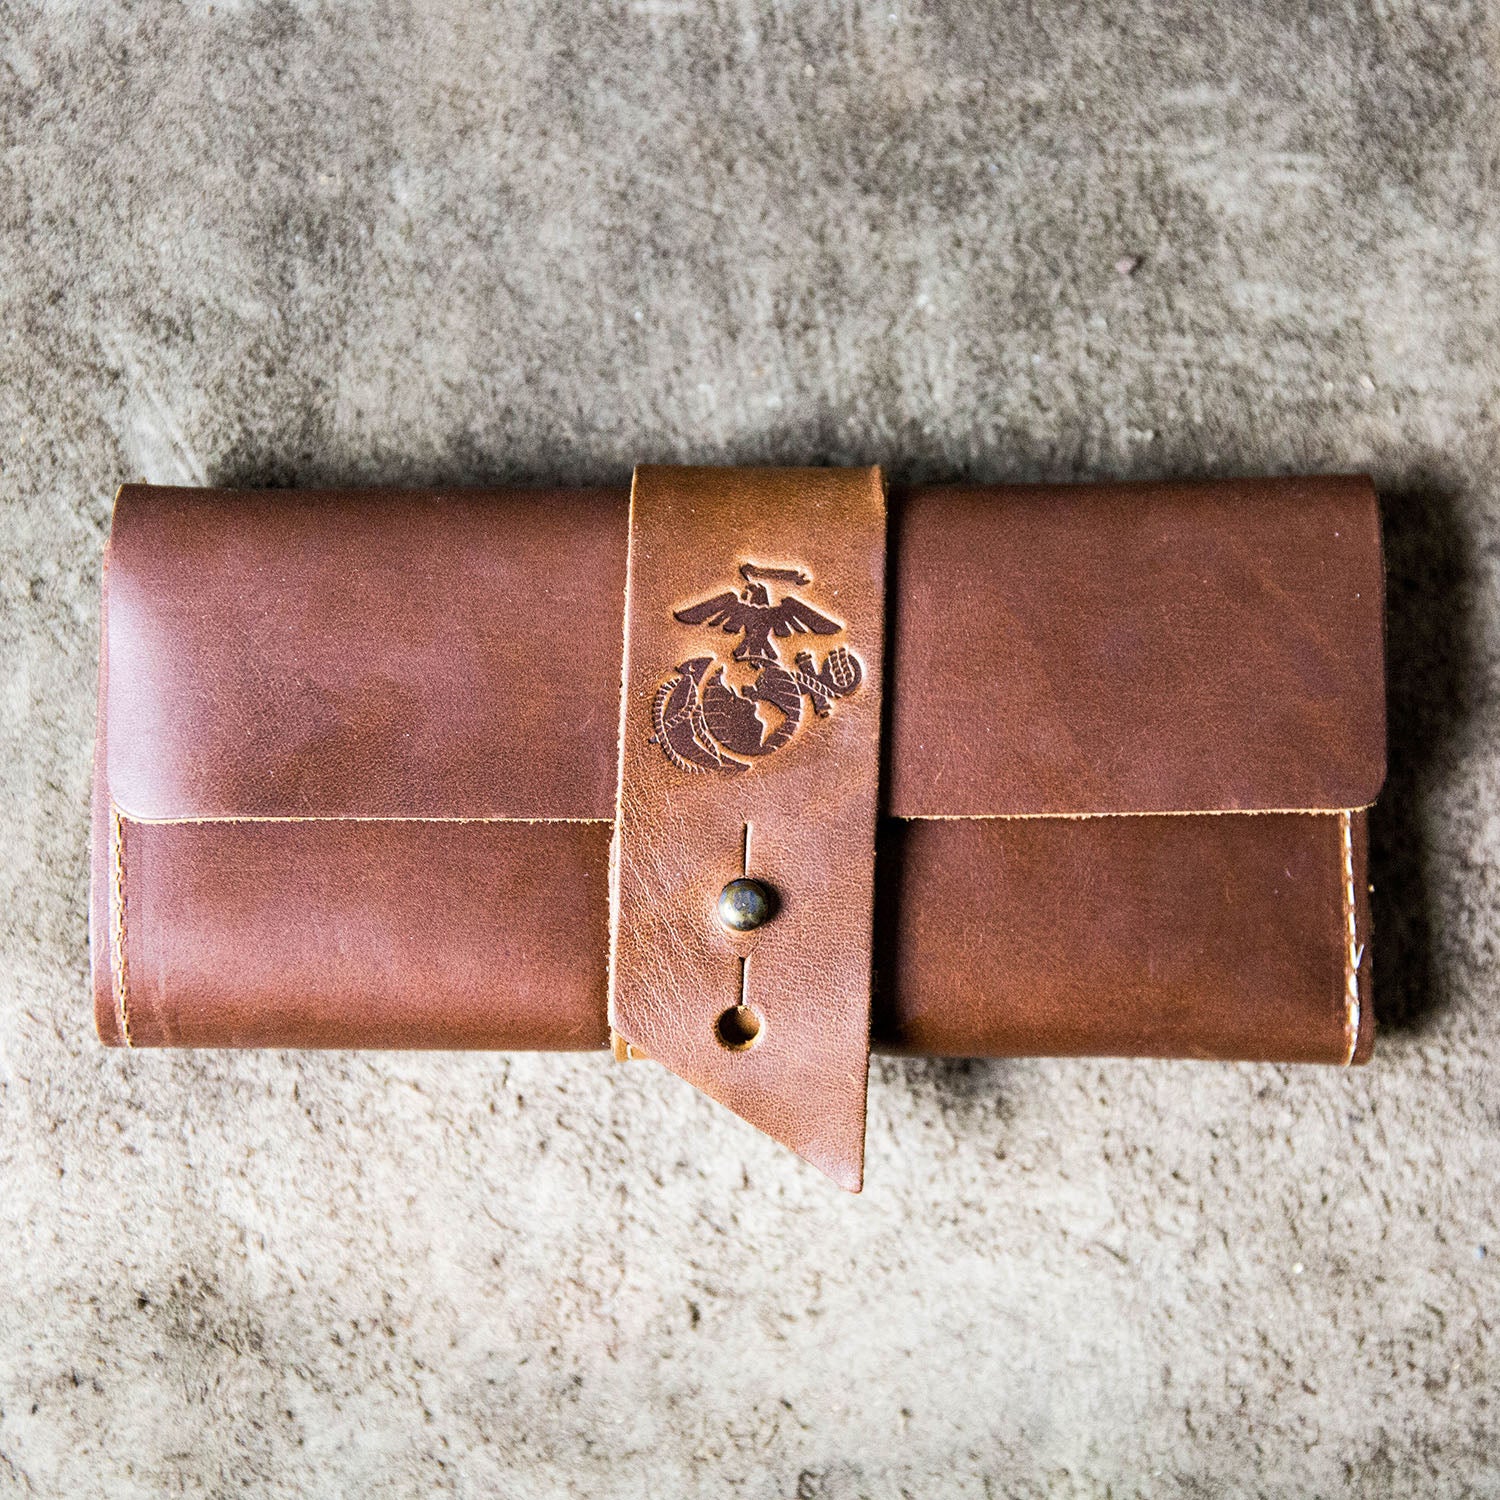 Fine leather wallet and checkbook cover with Marine Corps logo